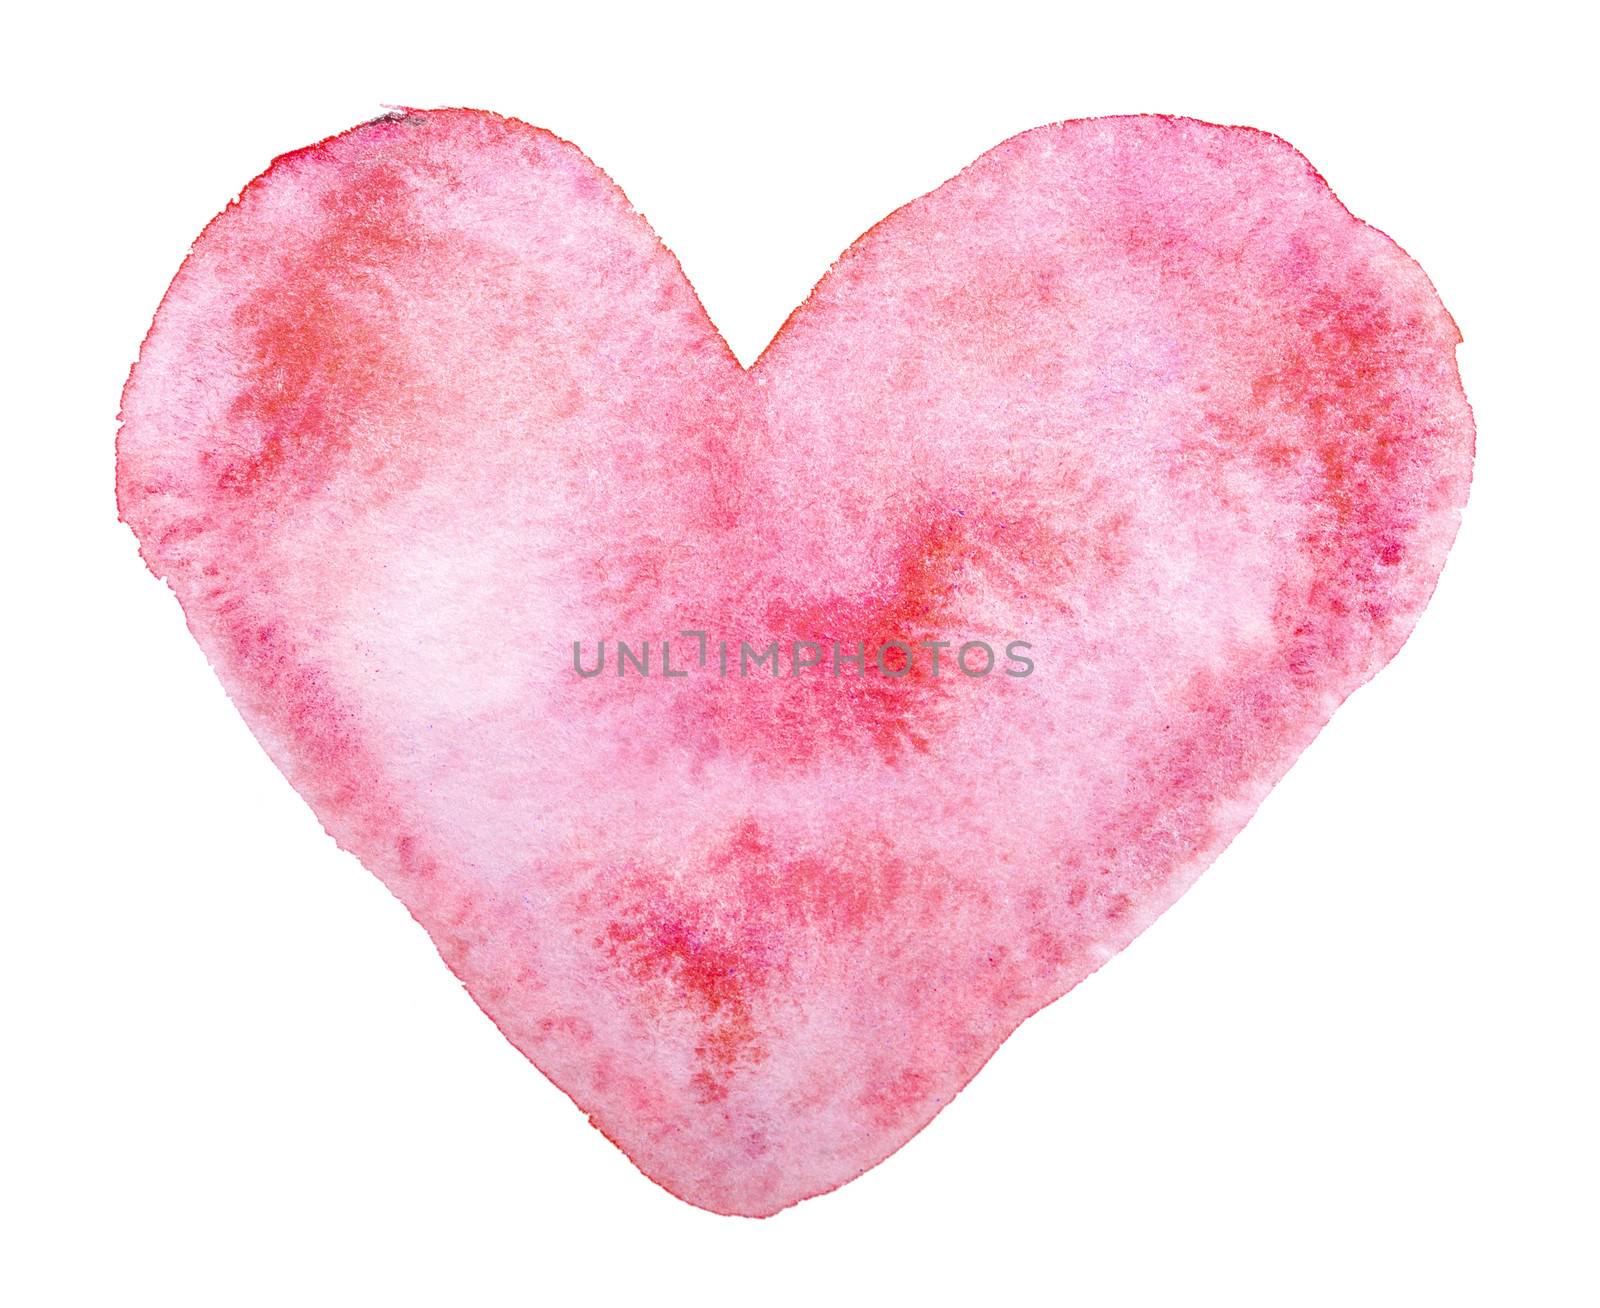 Watercolor painted red heart, for your design